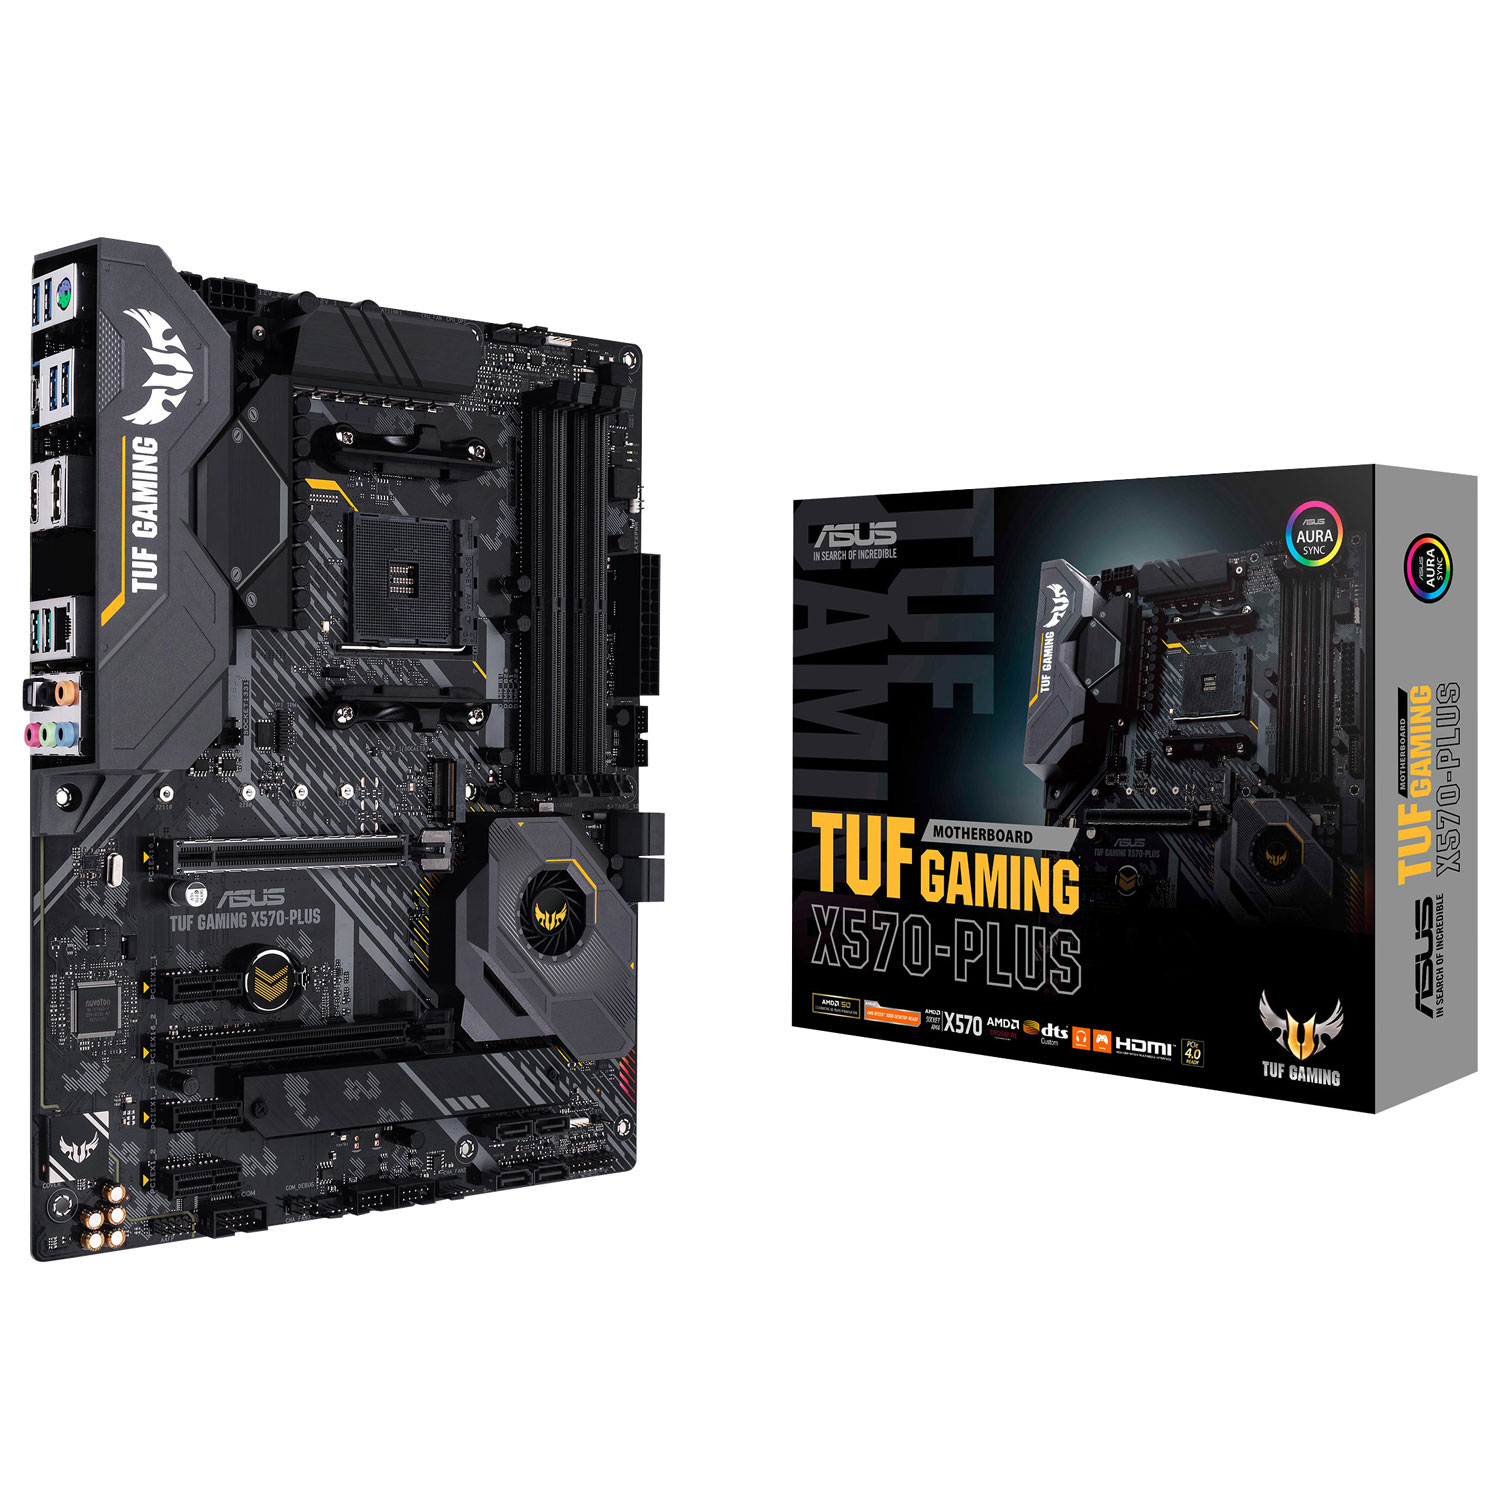 ASUS TUF Gaming X570-Plus (Wi-Fi) ATX AM4 DDR4 Motherboard for AMD Ryzen 3000/4000/5000 Series CPUs